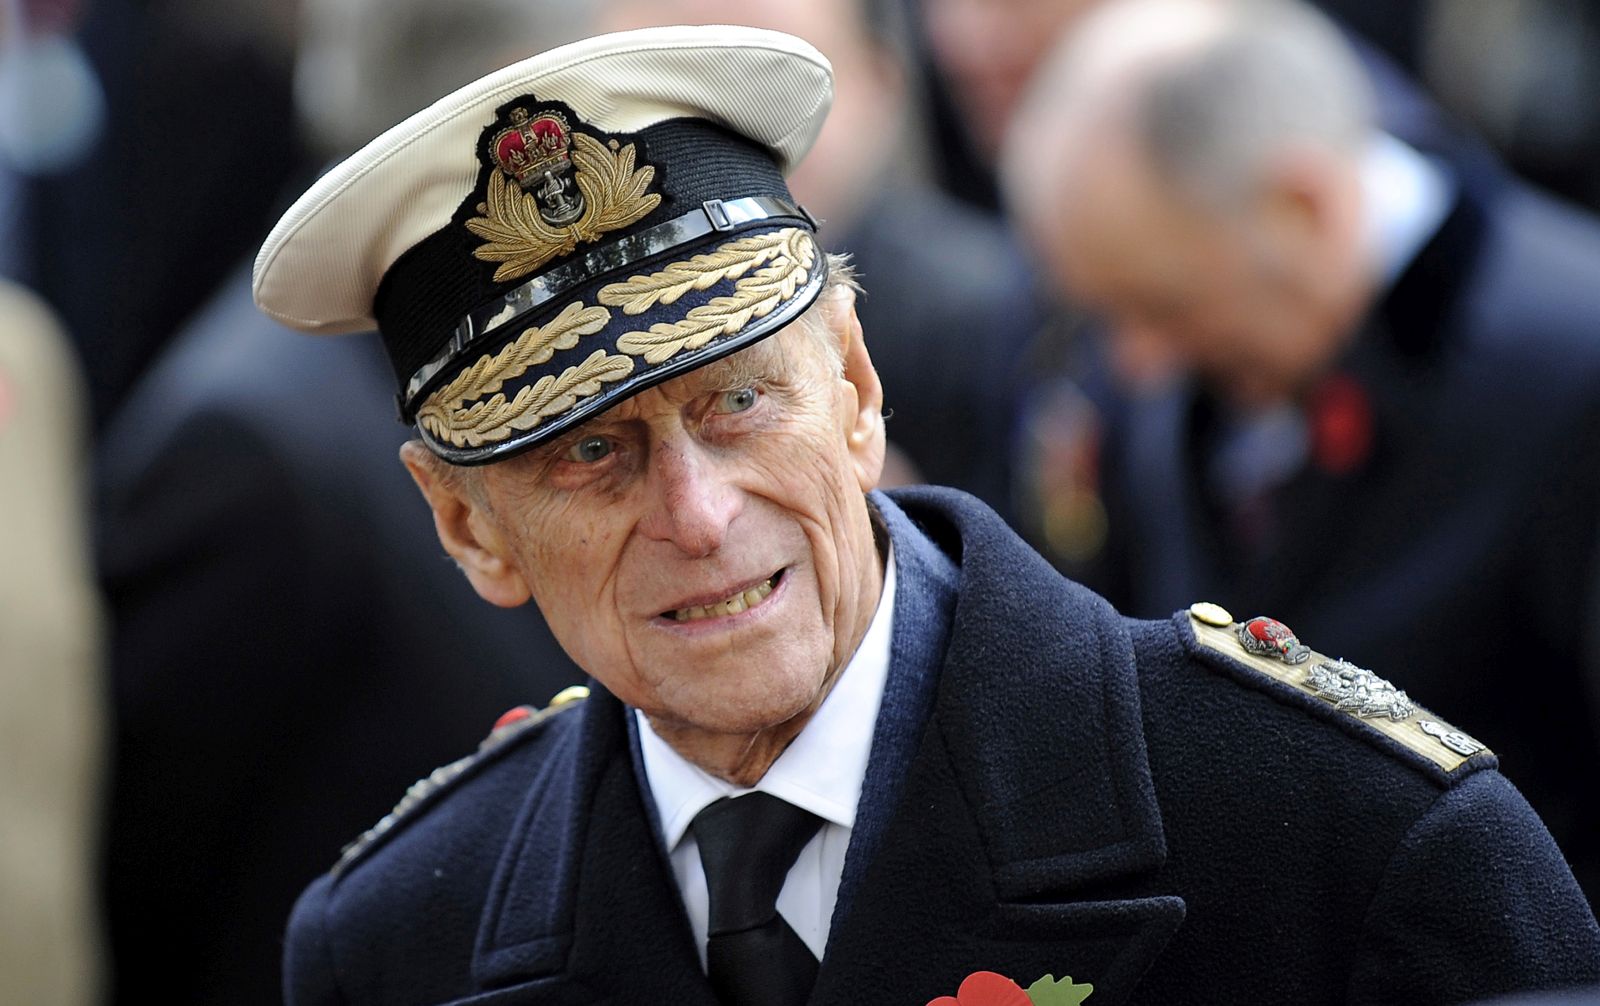 epa09044682 (FILE) - Britain's Prince Philip, the Duke of Edinburgh meets war veterans at the field of remembrance at Westminster Abbey in London, Britain, 08 November 2012 (reissued 01 March 2020). Prince Philip has been transferred to St Bartholomew's Hospital in London on 01 March 2021 to treat an infection and a pre-existing heart condition, Buckingham Palace said. The British royal was admitted to King Edward VII's hospital on 16 February 2021 as a precautionary measure after feeling unwell.  EPA/ANDY RAIN